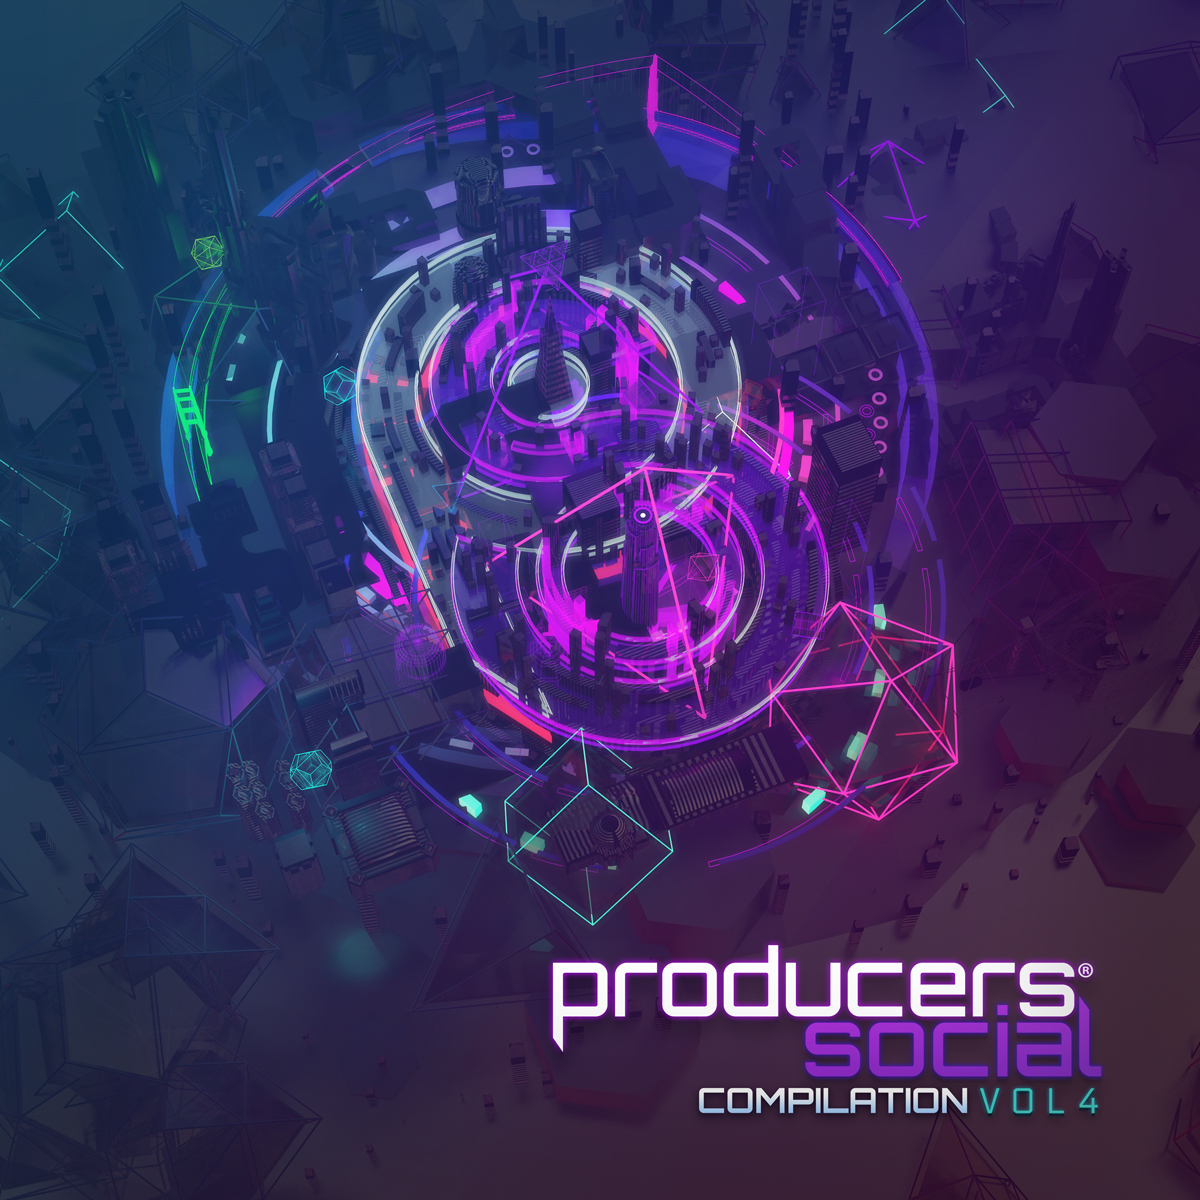 Producers Social Compilation Vol 4 Cover Art by Axon Genesis